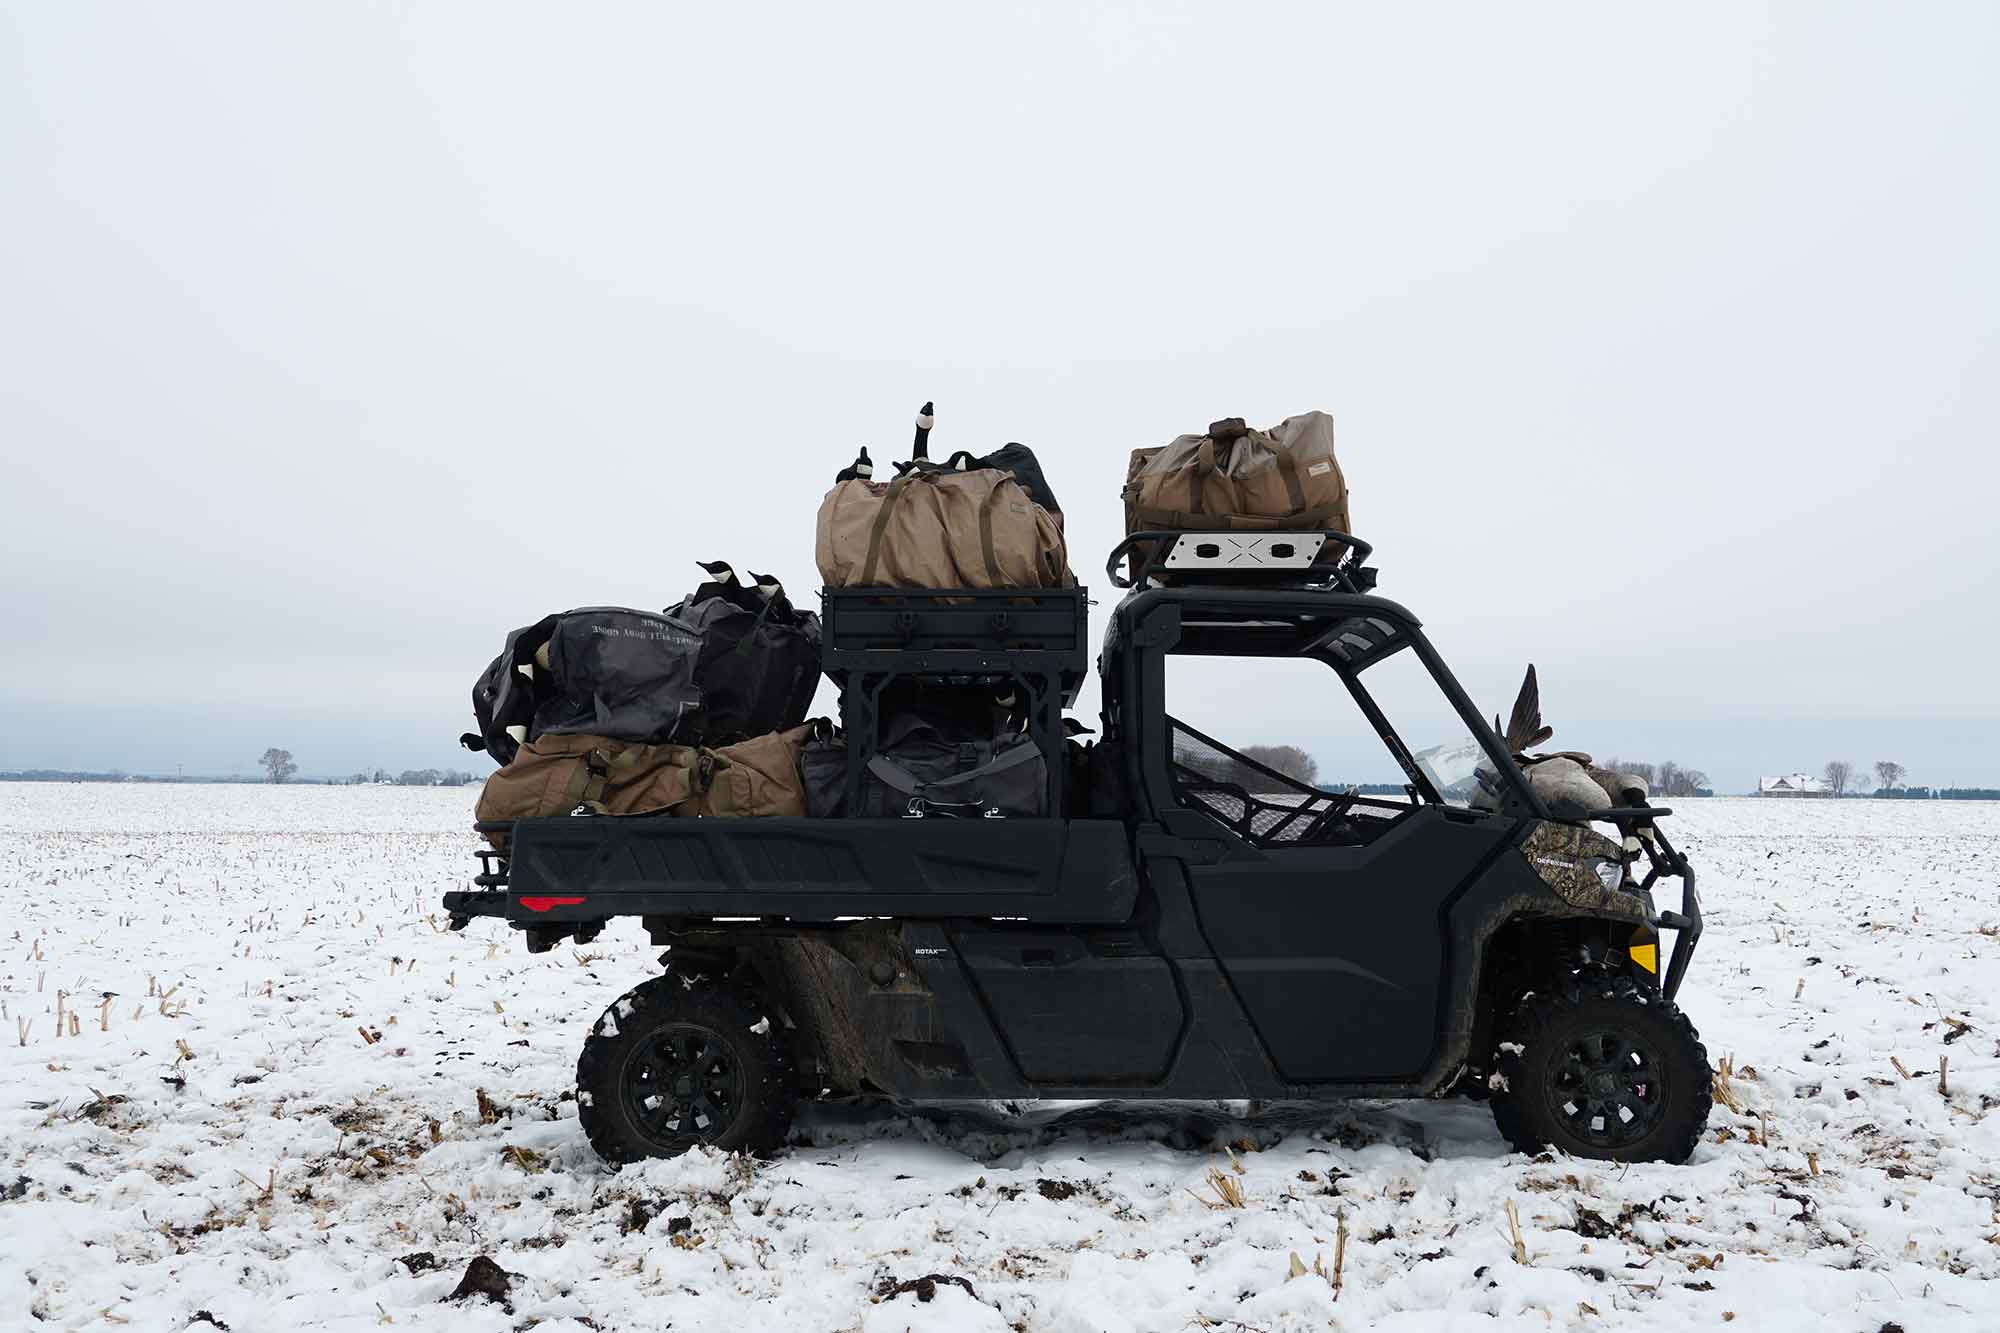 The Can Am Defender fully loaded after a cold hunt in Minnesota.